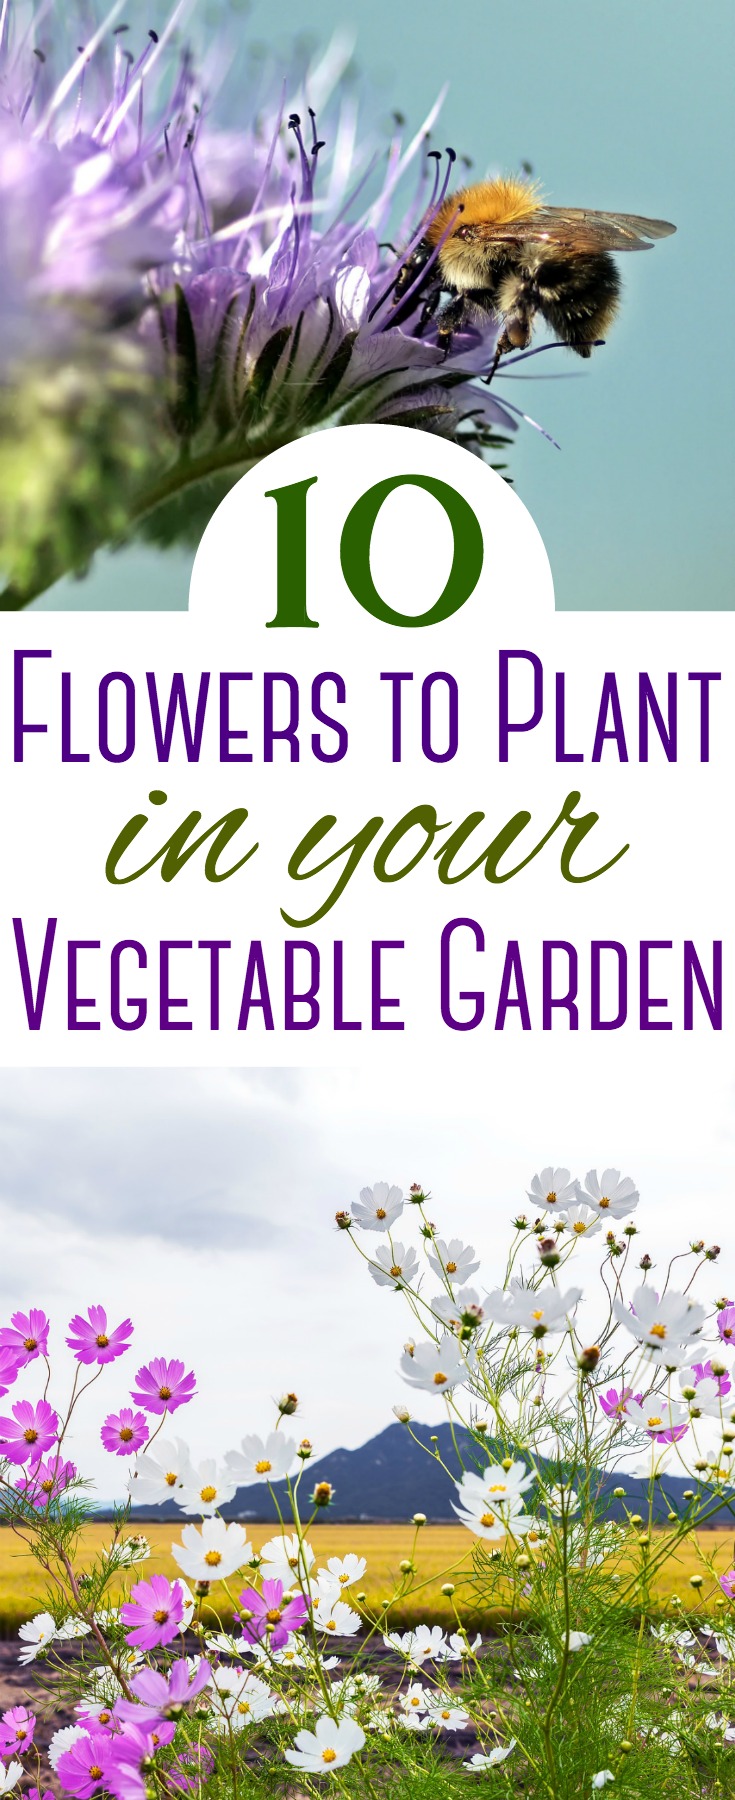 You might consider squeezing in some space to grow some of these flowers in your vegetable garden. They will add some color and help your plants thrive!